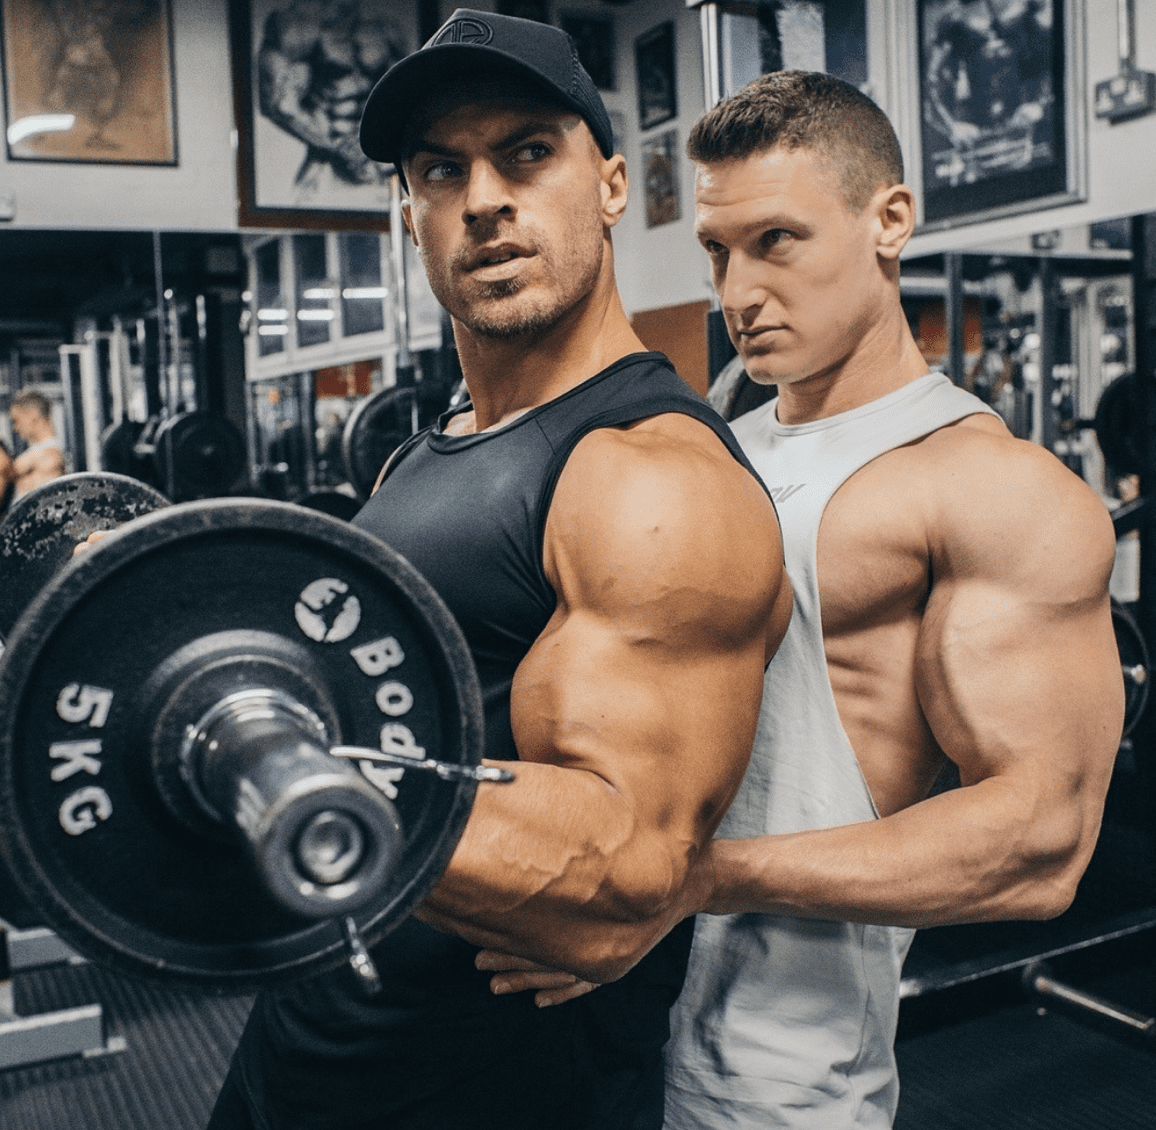 The New 24 HOUR FITNESS: A Muscle Worship Gym, Part 2